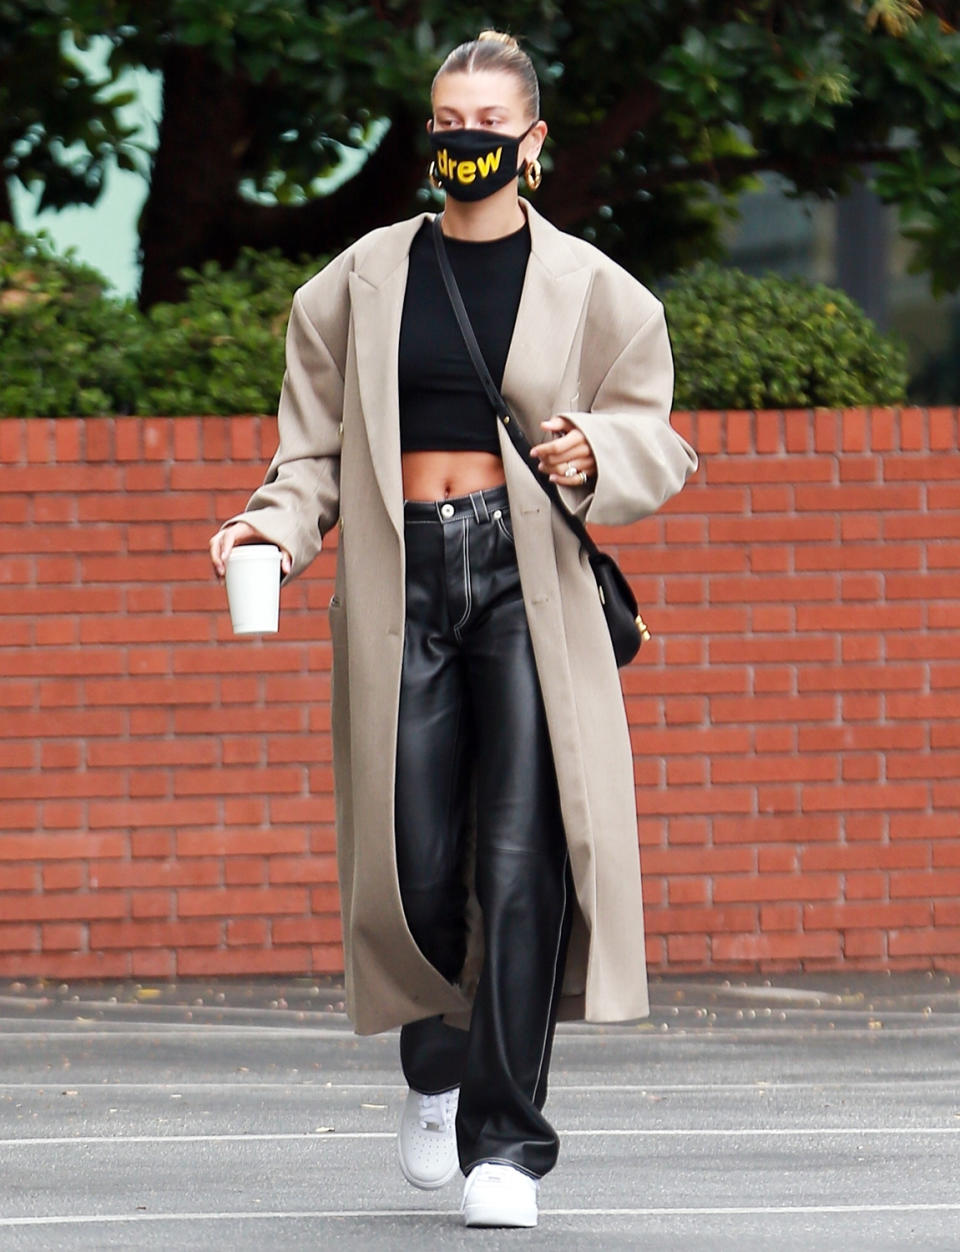 <p>Back from a photo shoot in Italy, Hailey Bieber makes a Sunday morning trip to Blue Bottle Cafe in Beverly Hills while looking chic in a sleek bun and long coat.</p>